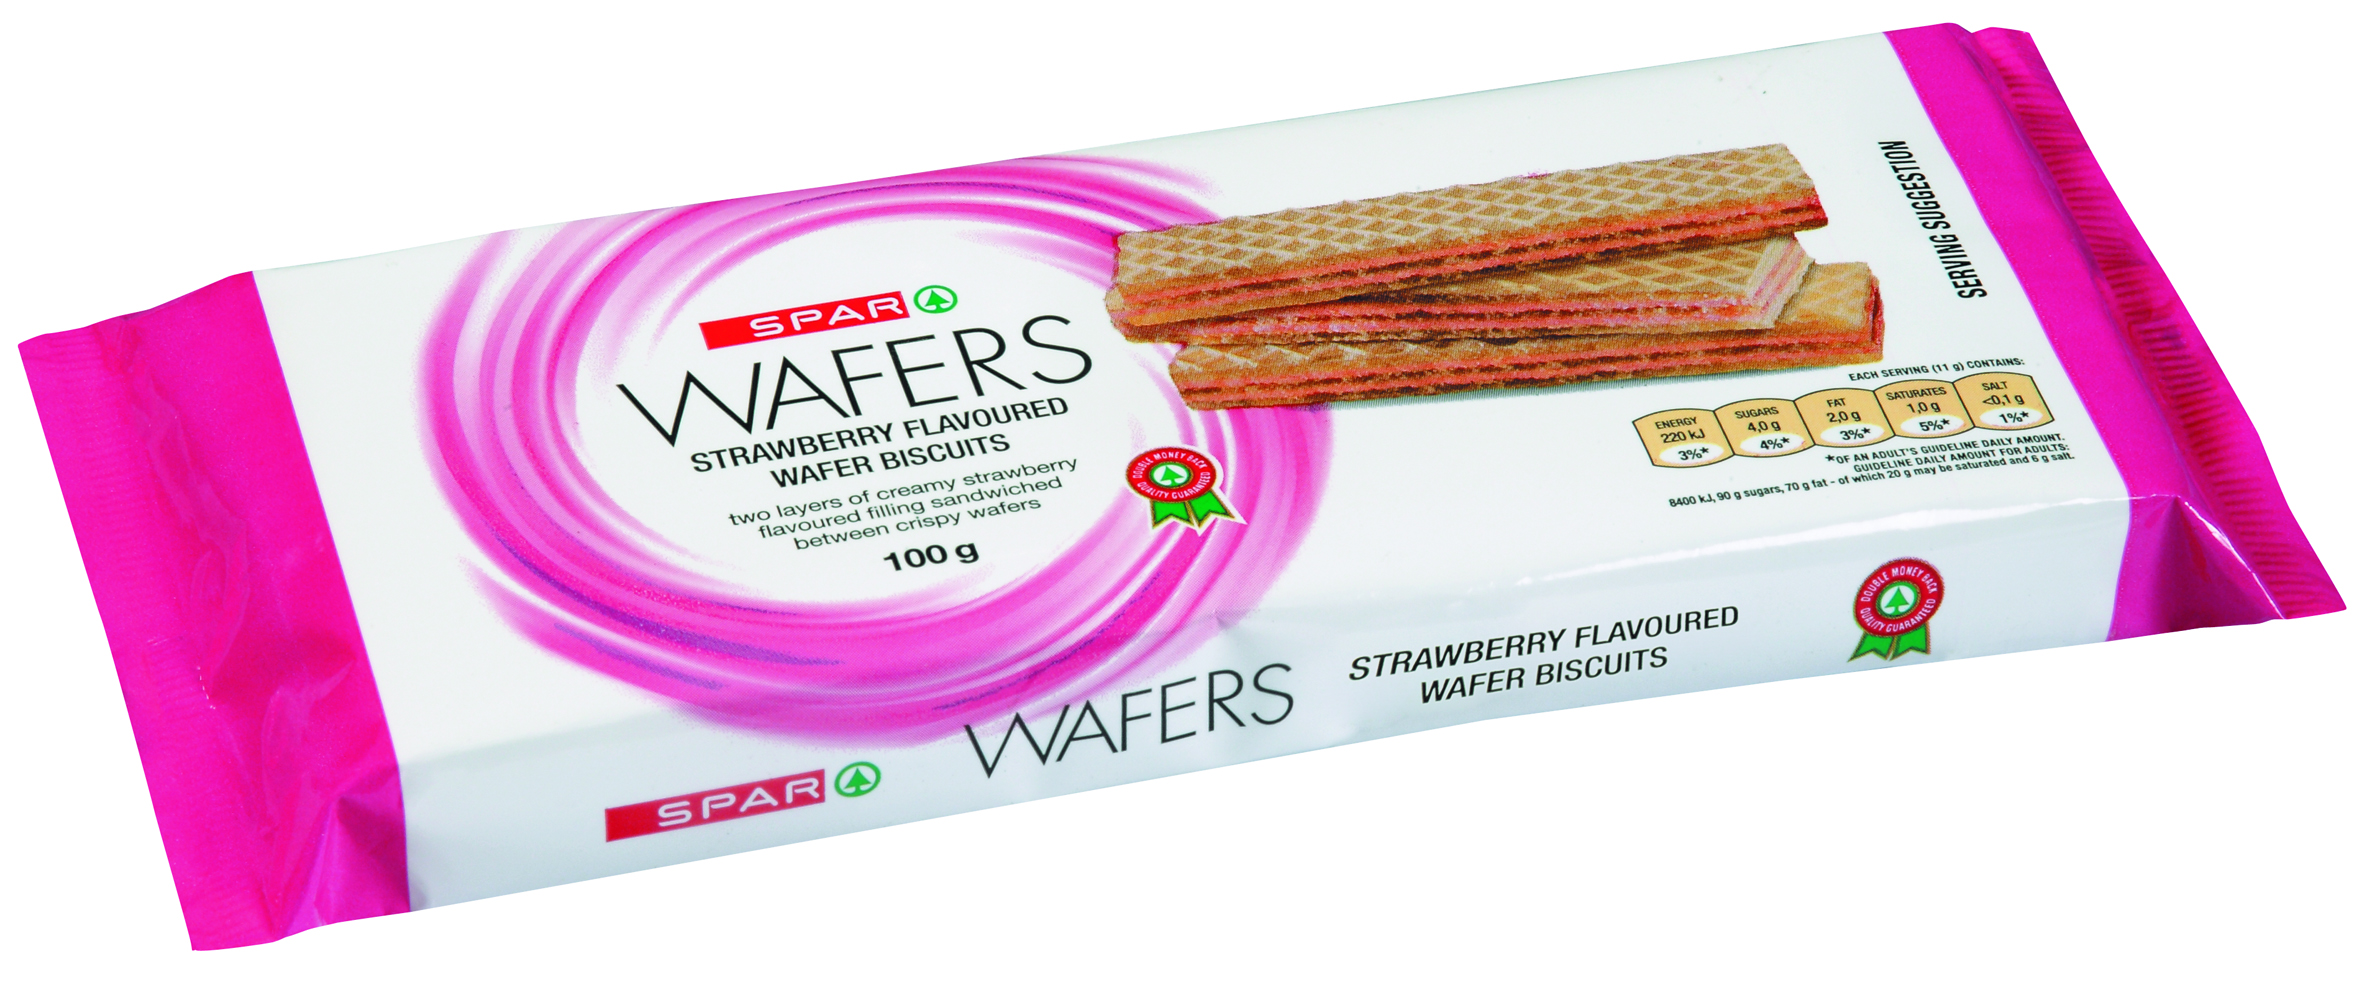 wafer biscuits - strawberry flavoured